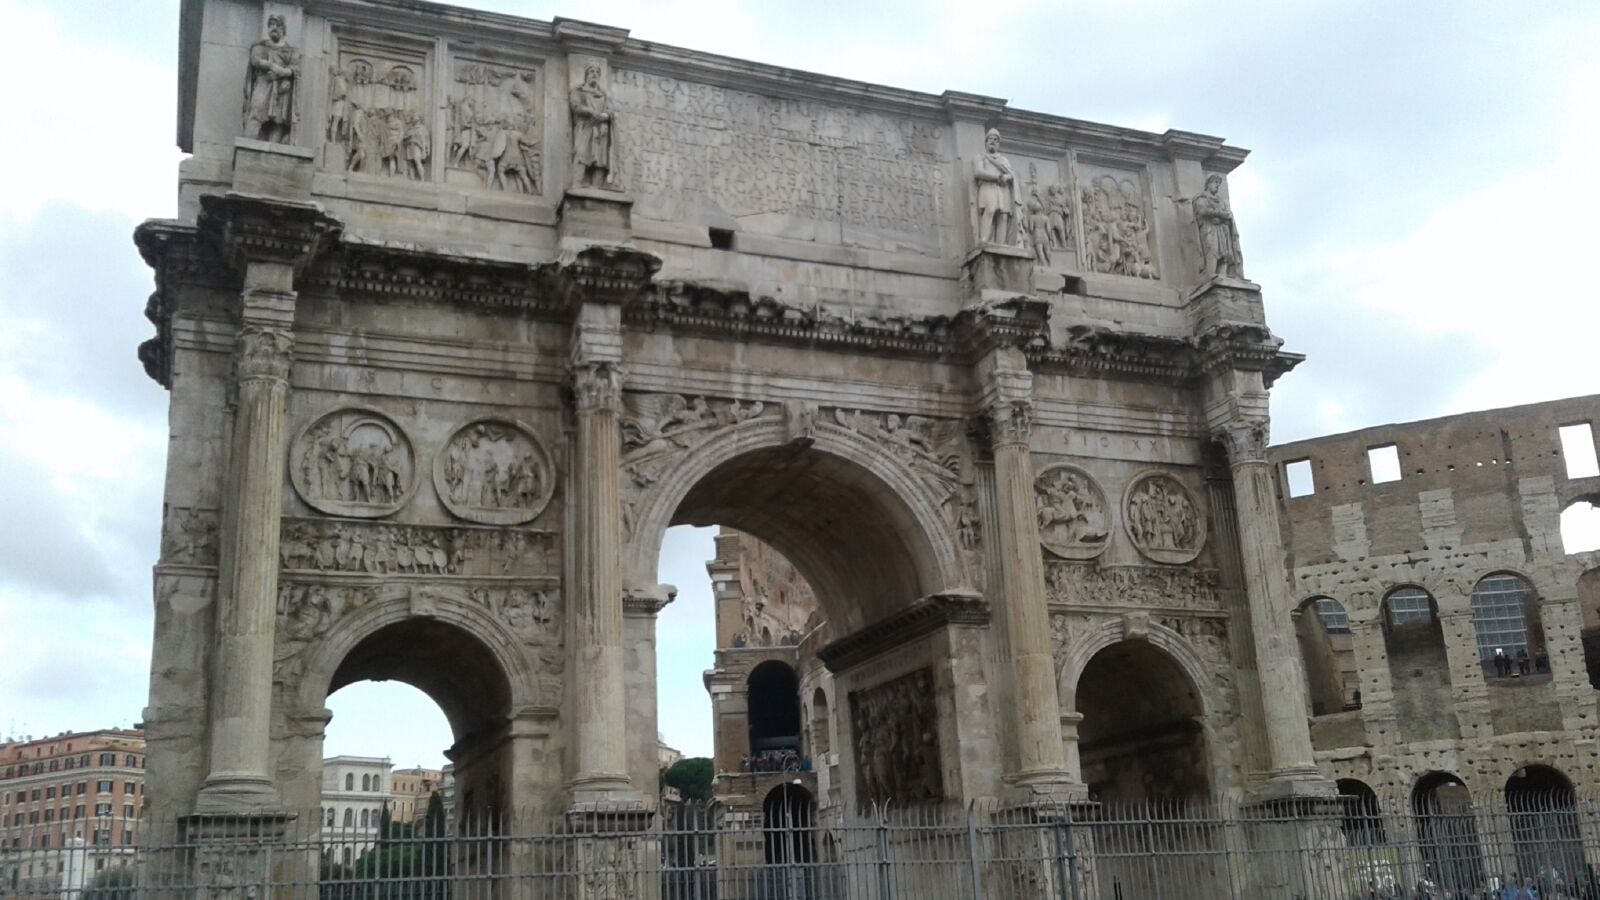 Samsung Galaxy J2 sample photo. Arch of titus, victorious photography